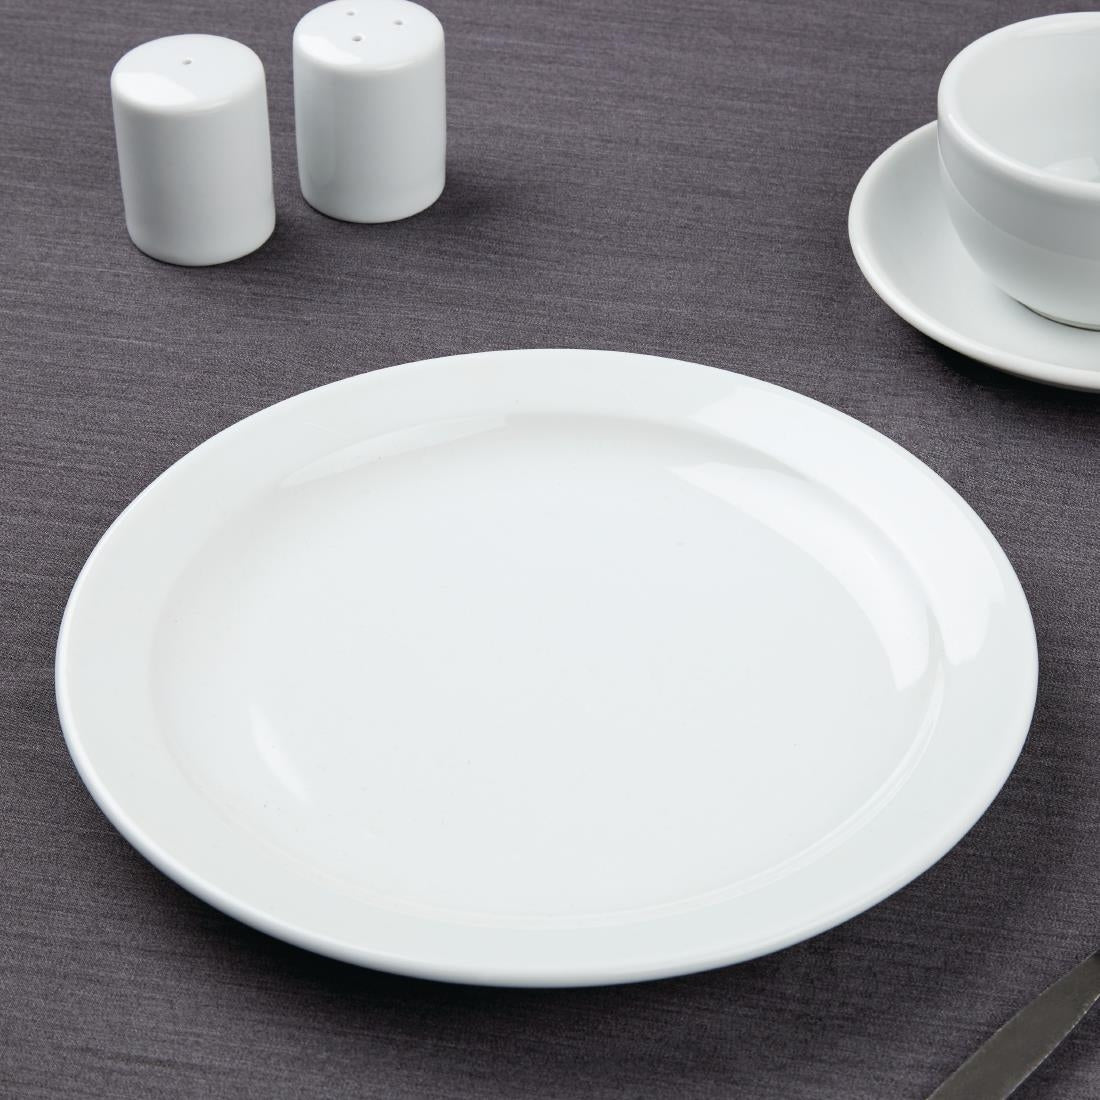 Athena Hotelware Narrow Rimmed Plates 226mm (Pack of 12) JD Catering Equipment Solutions Ltd